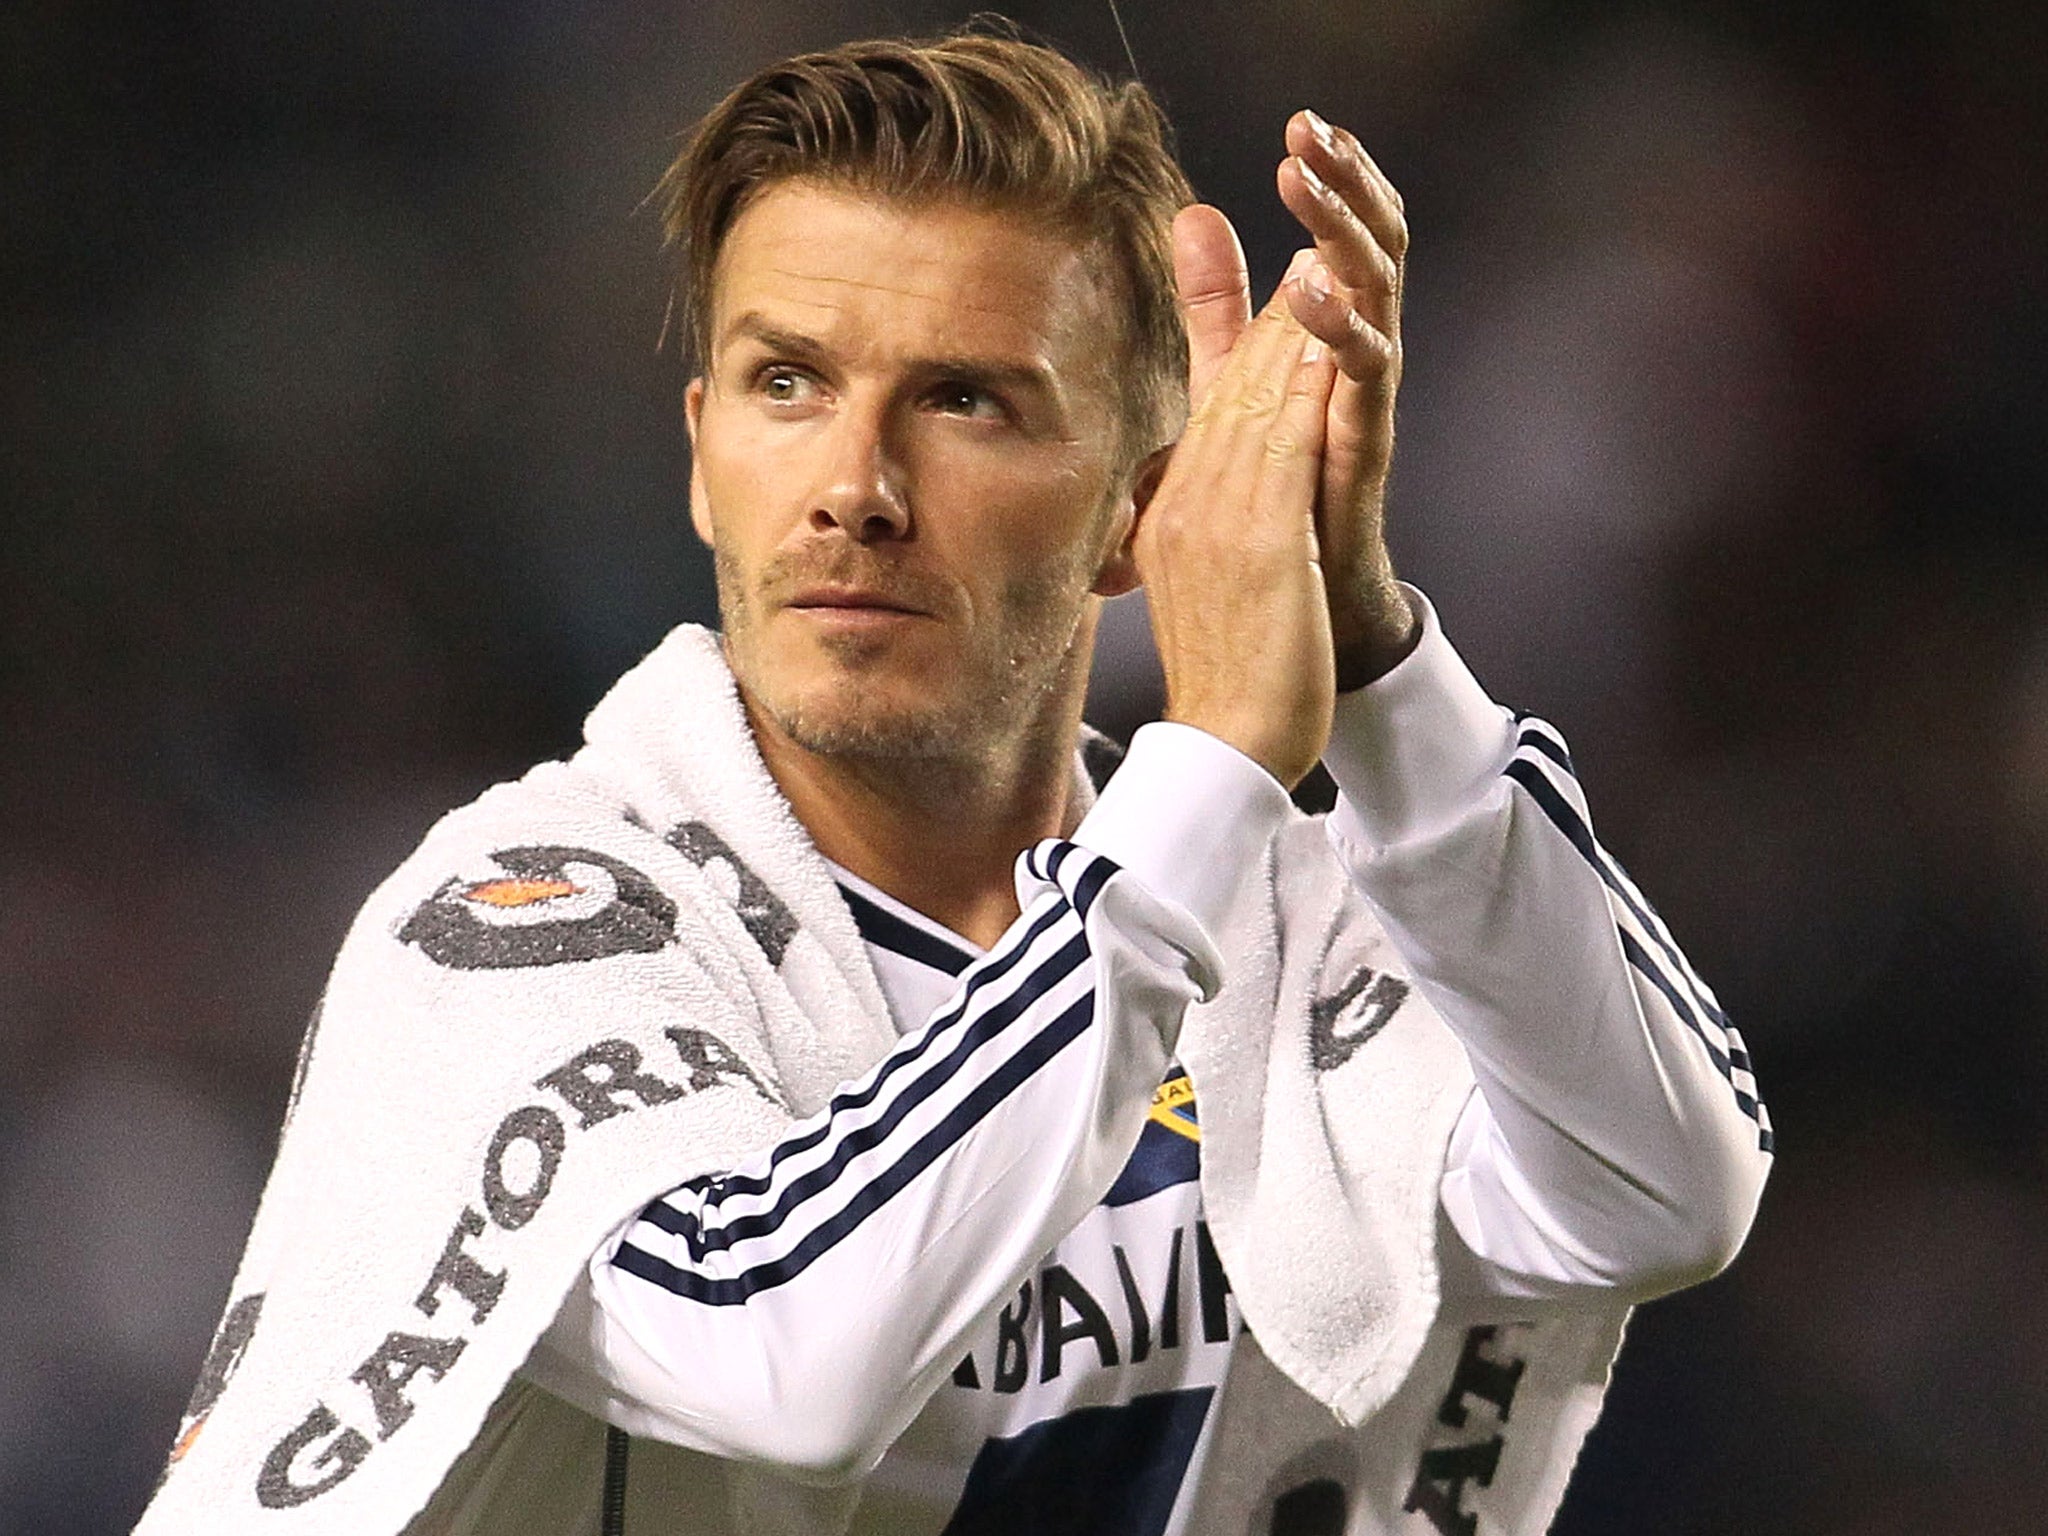 David Beckham applauds the fans after the Los Angeles Galaxy's match against the San Jose Earthquakes earlier this month